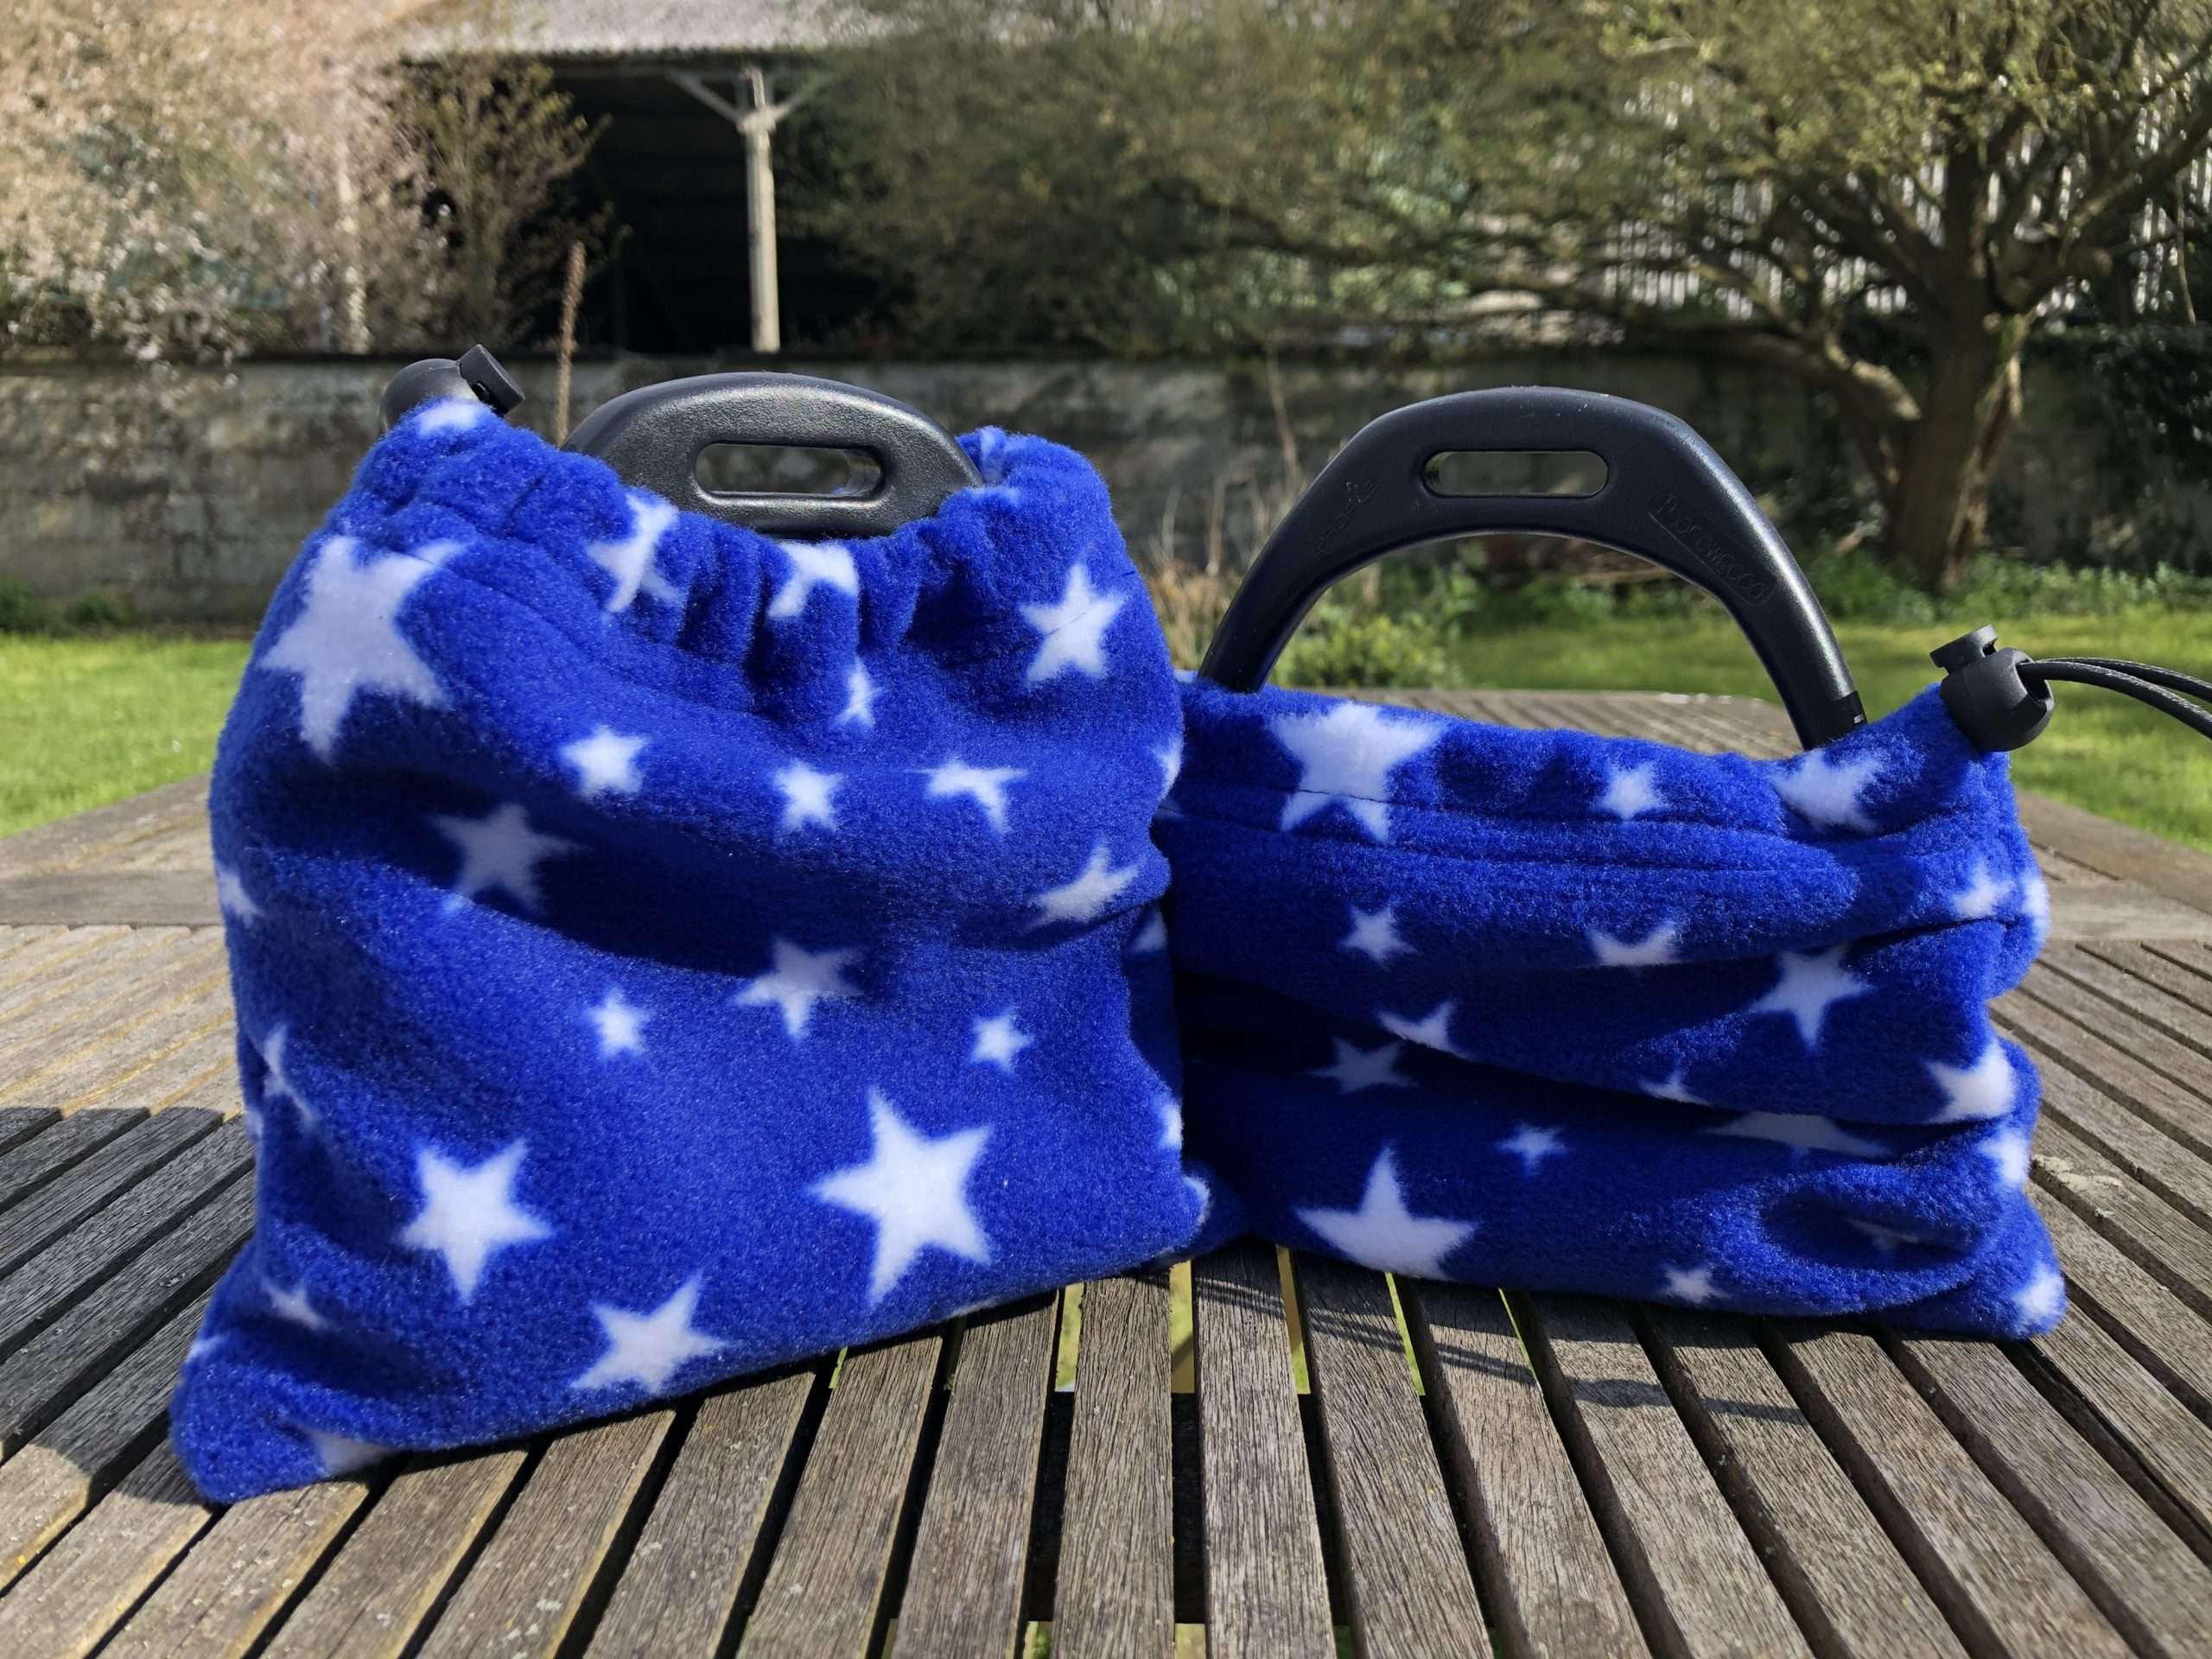 IMG 2340 scaled Fleece Stirrup Covers - Stars Help protect your saddle from dirt and scratches from the stirrups. Approx 7x7 inches Items posted within 1-3 working days. Shipped using Royal Mail 2nd Class. Back orders allow an extra 7 - 8 working days.